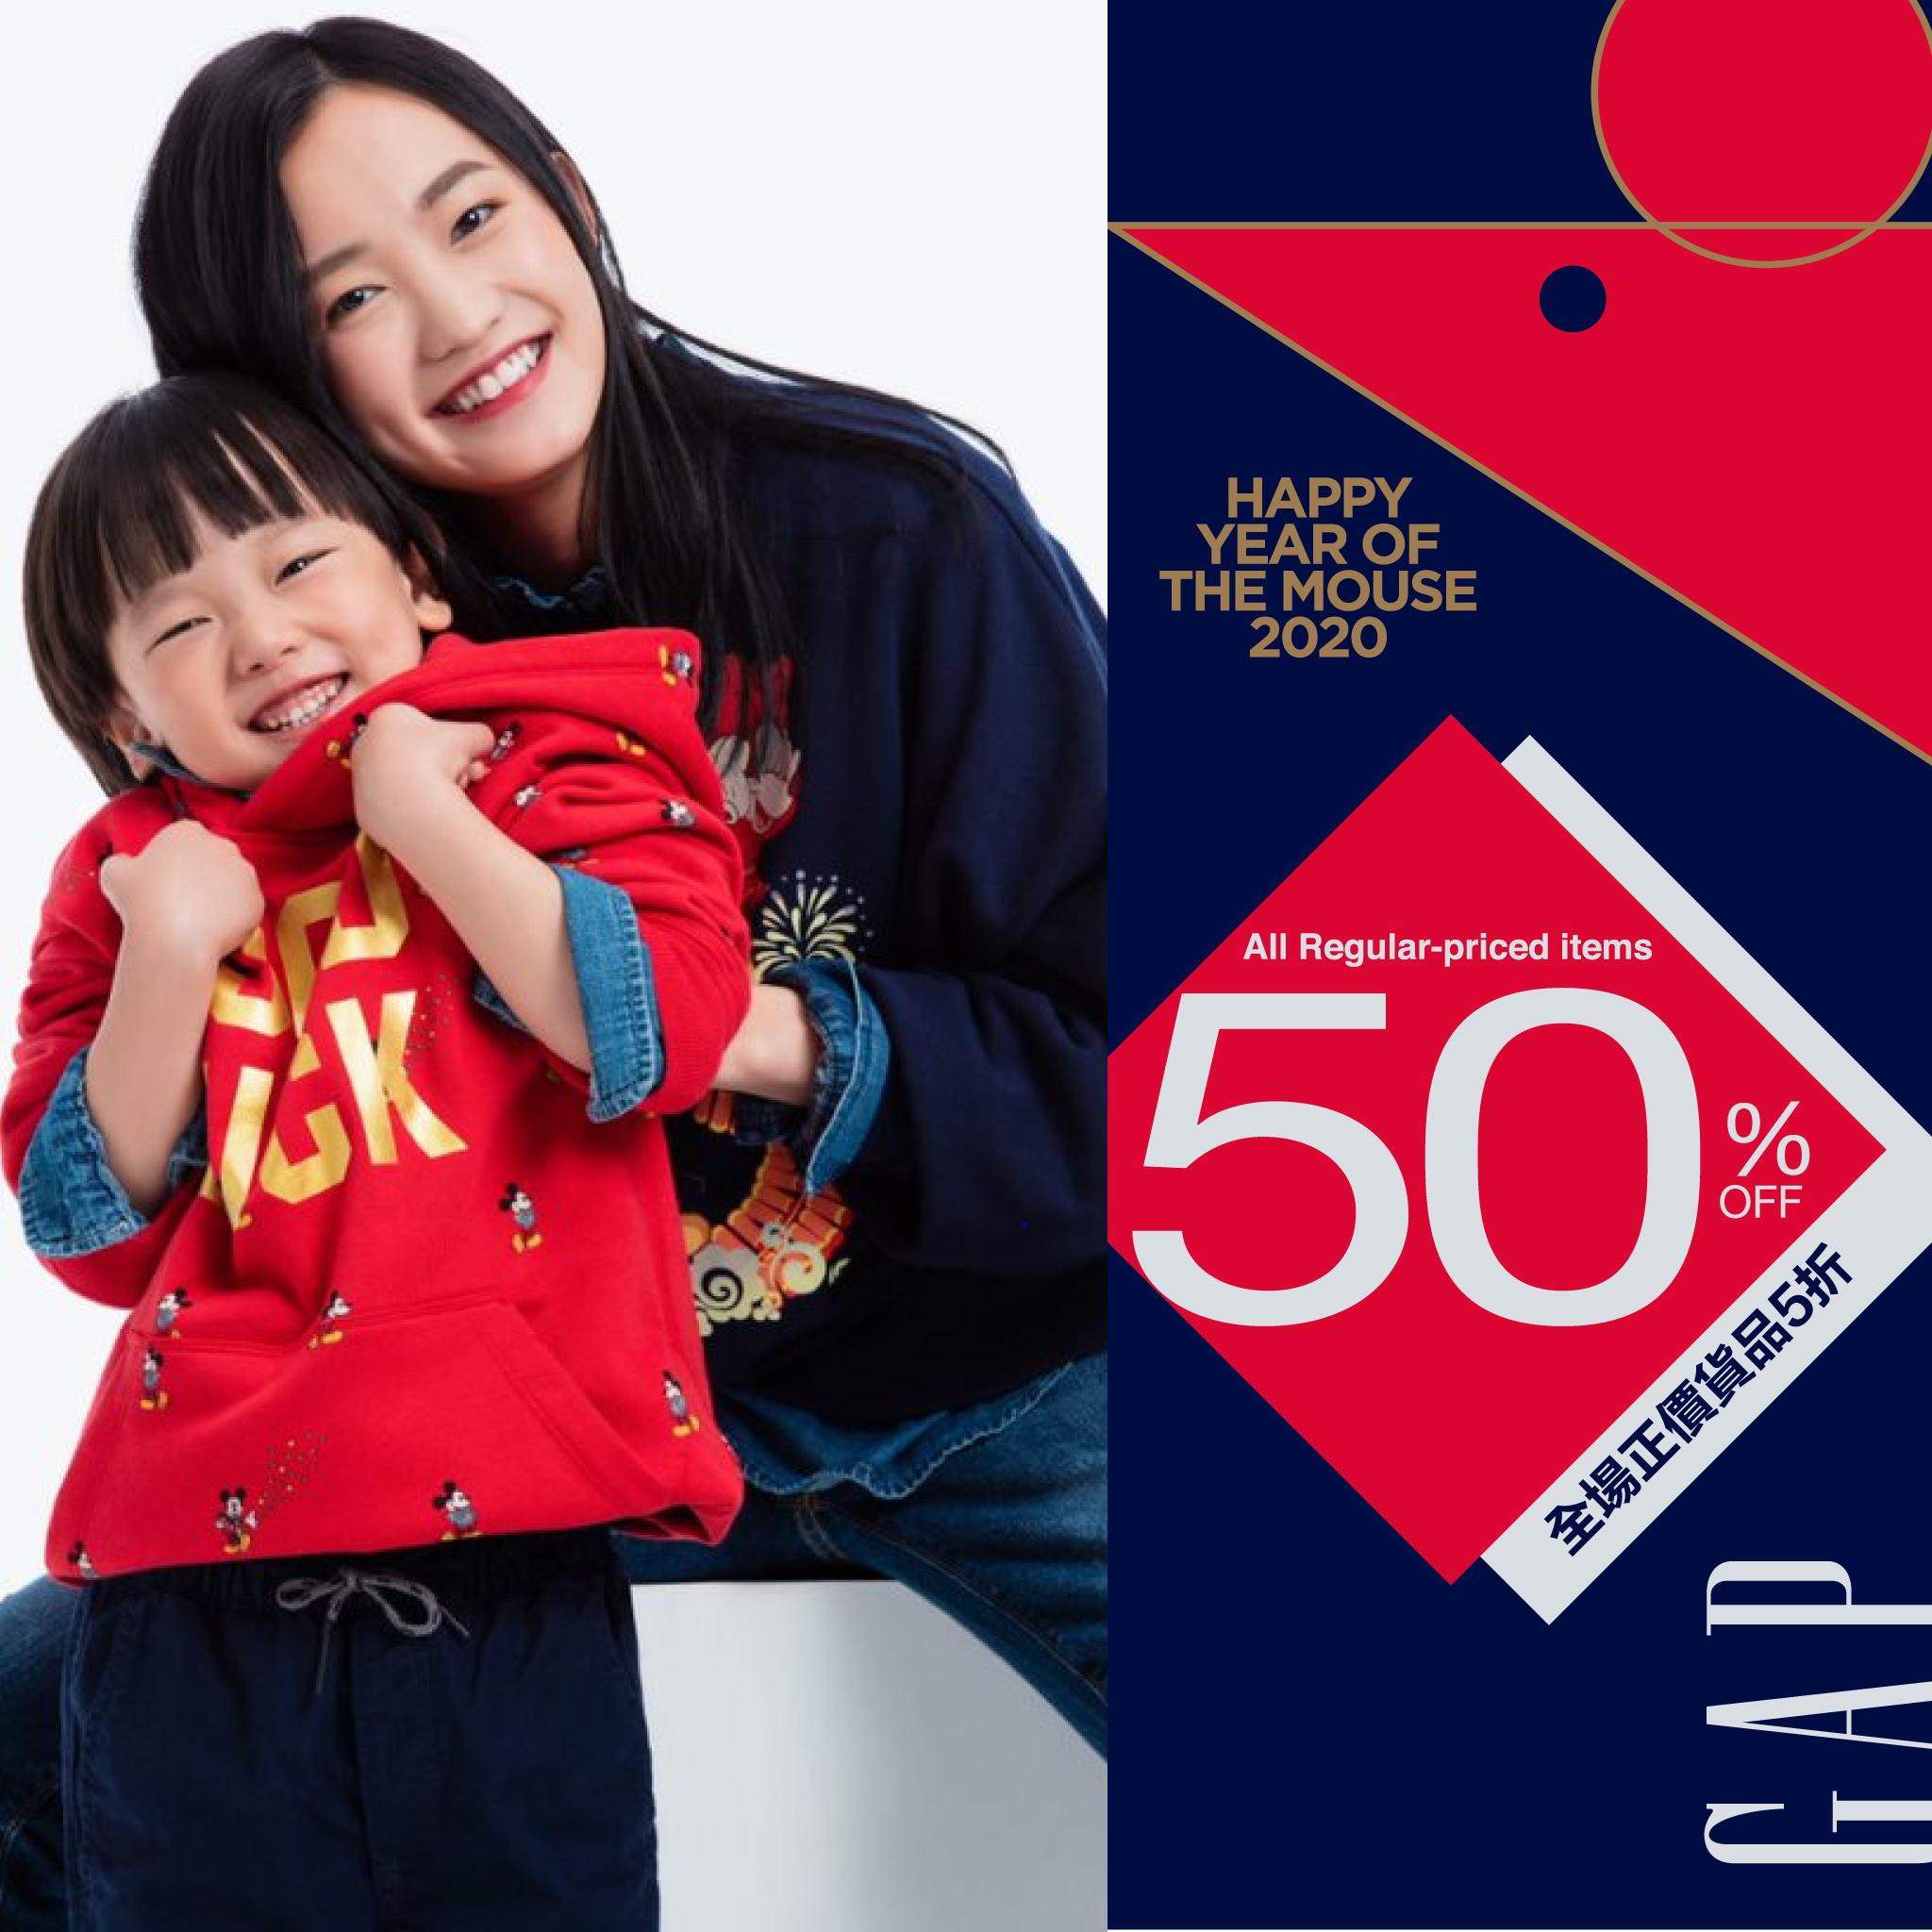 【50% Off to Welcome The Year of the Mouse! | 以5折添置新衣，迎接鼠年！】